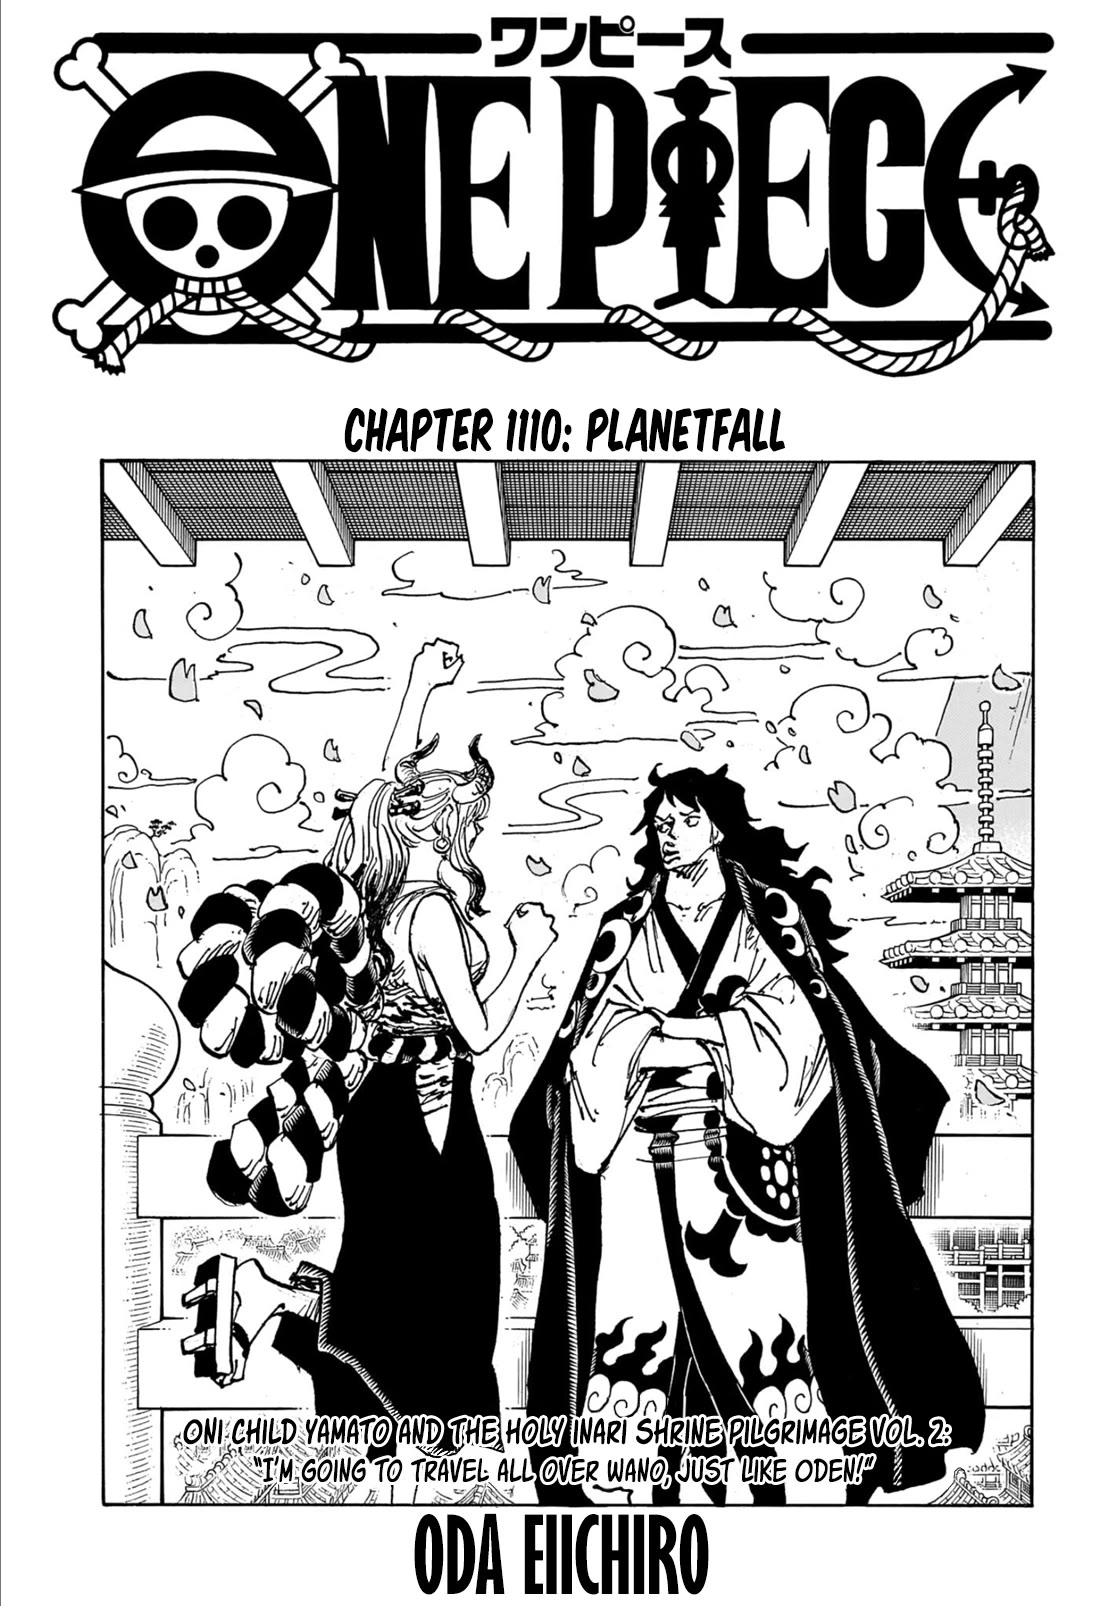 One Piece, Chapter 1110 Planetfall image 01